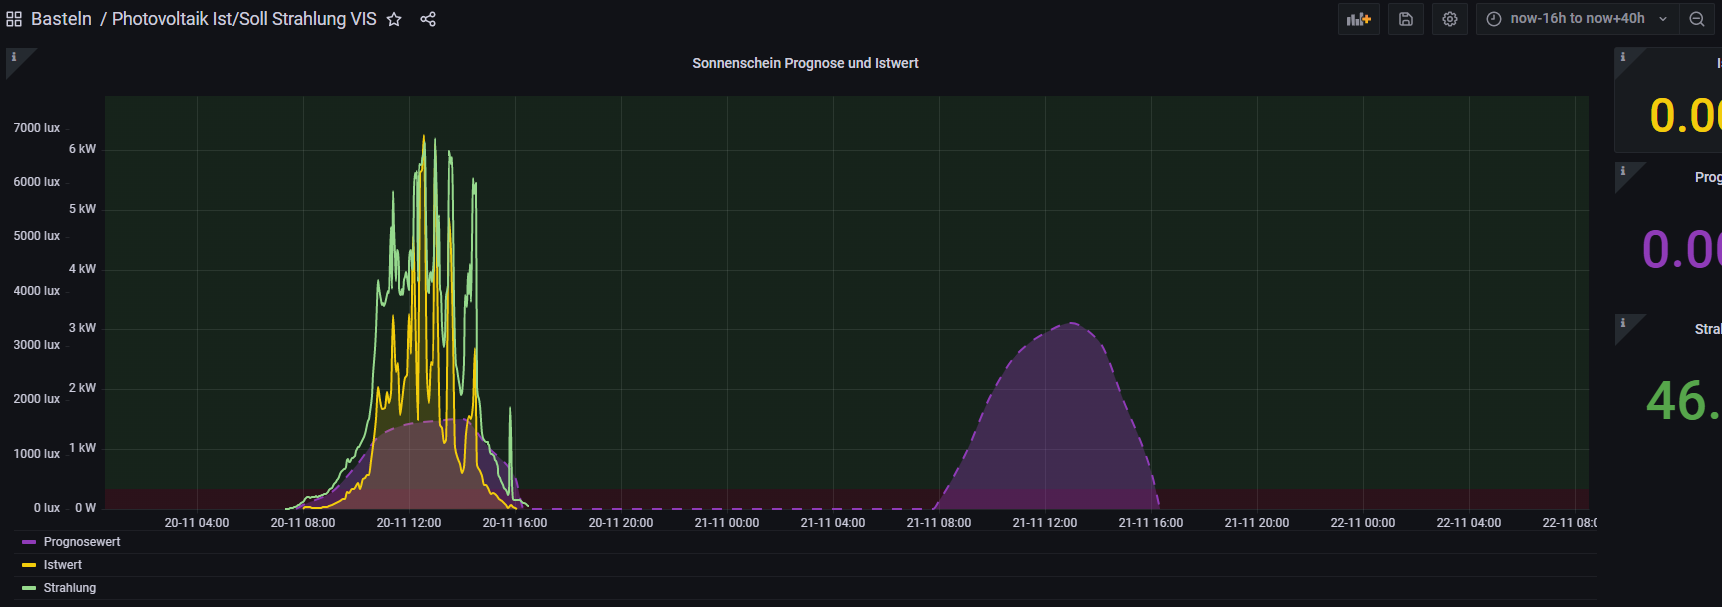 2022_11_20 16_31_55-Photovoltaik Ist_Soll Strahlung VIS - Dashboards - Dashboards - Grafana.png